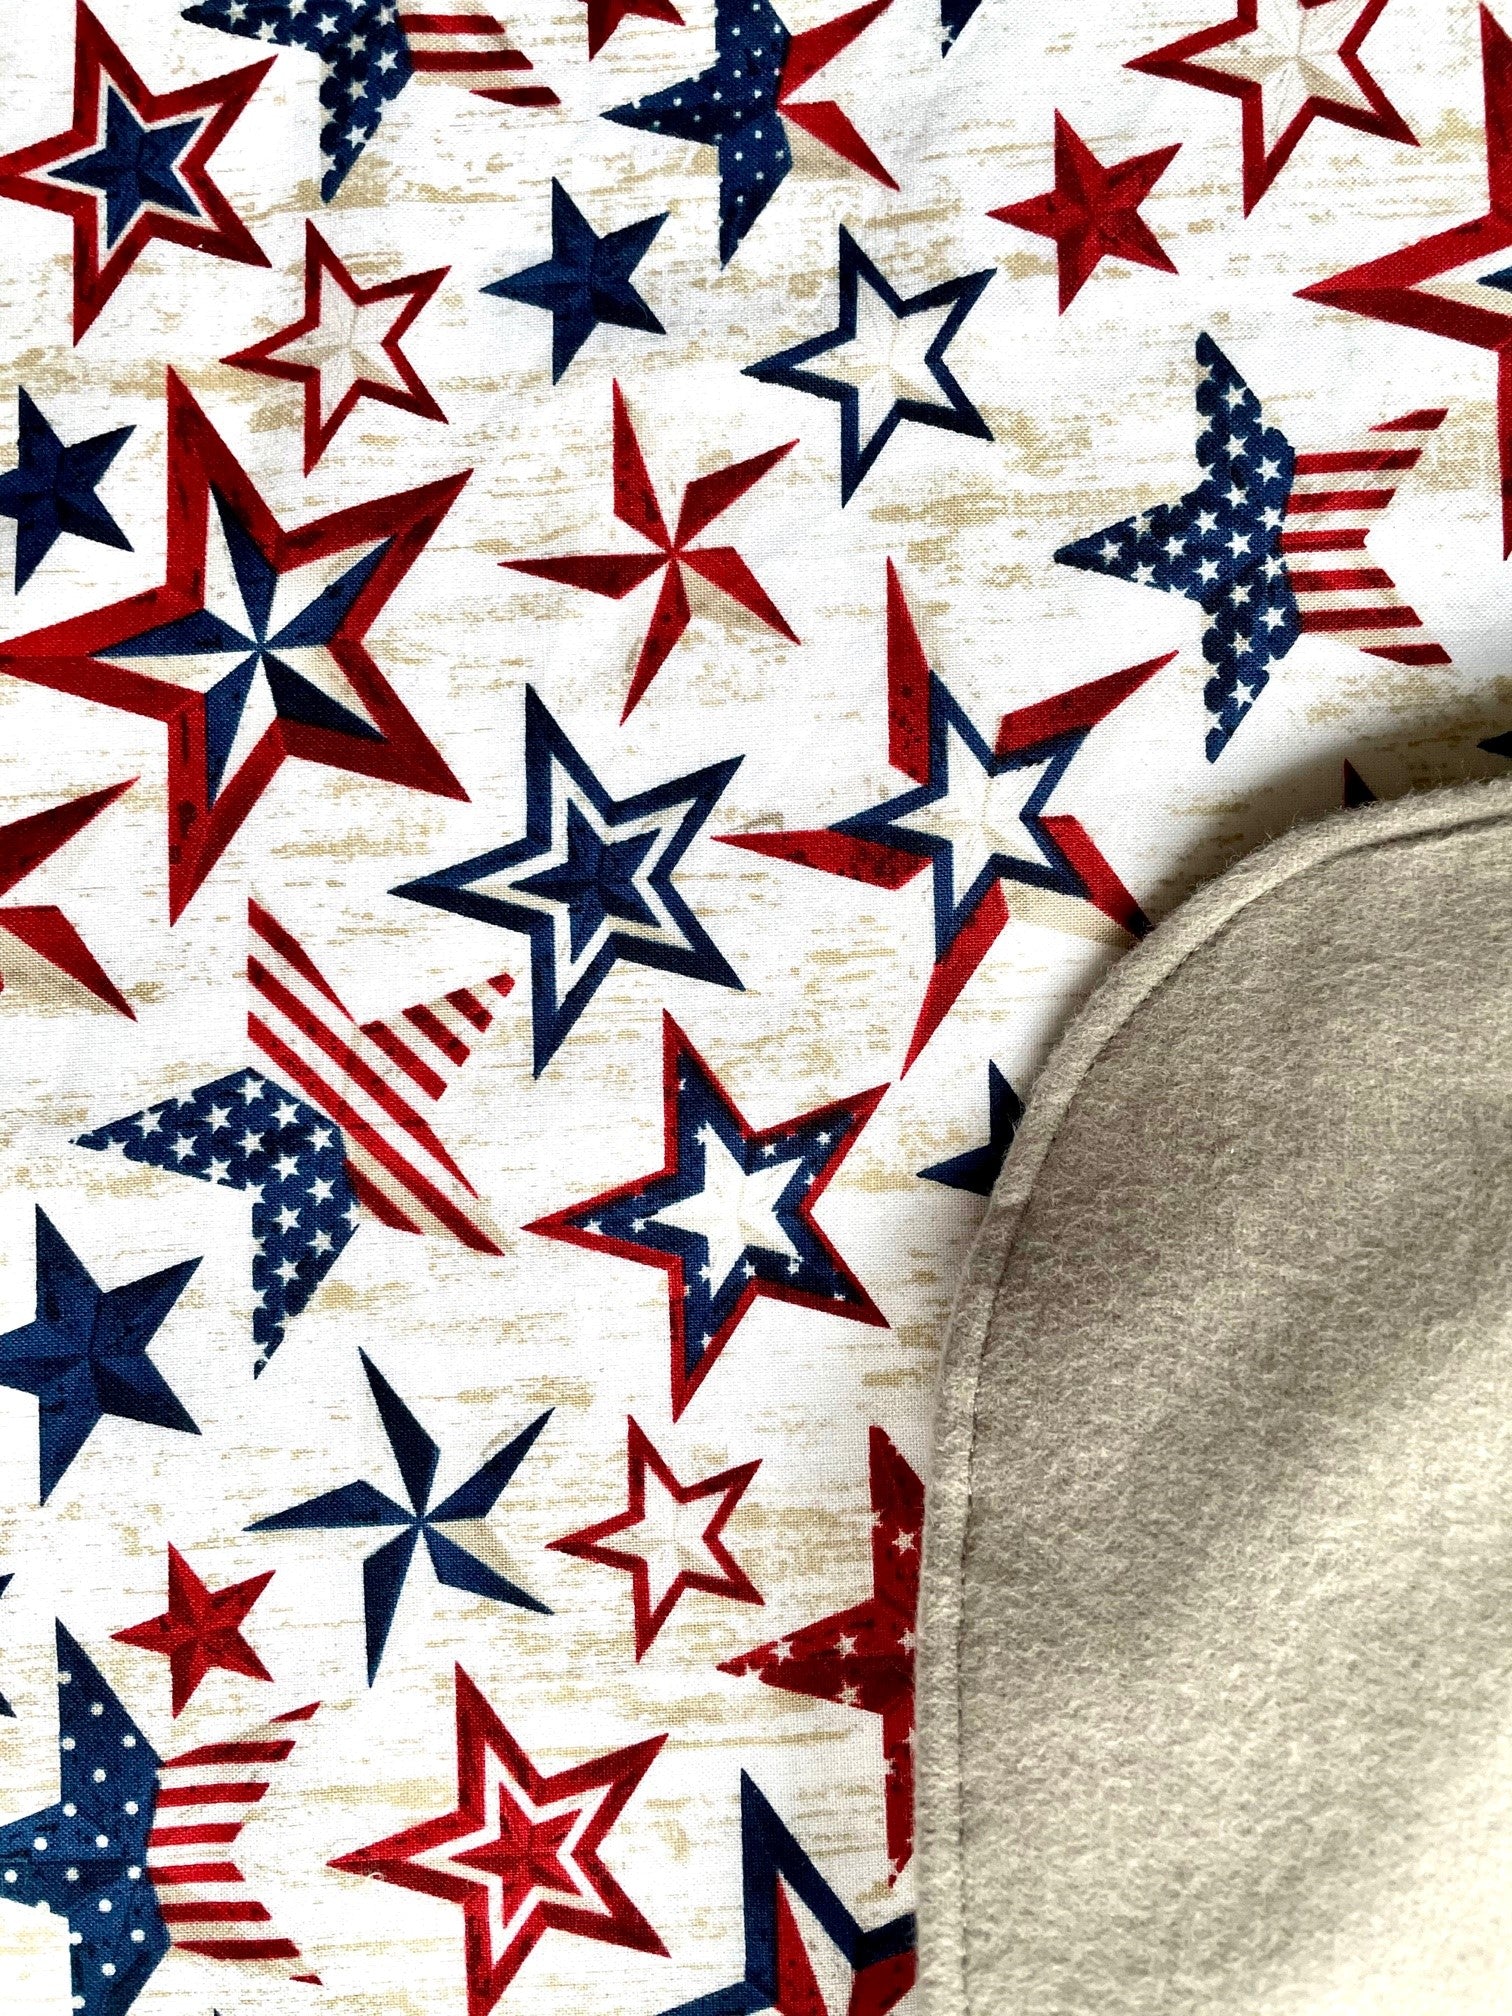 A close up of the premium cotton fabric used to make Stars + Stripes Bavette adult bib